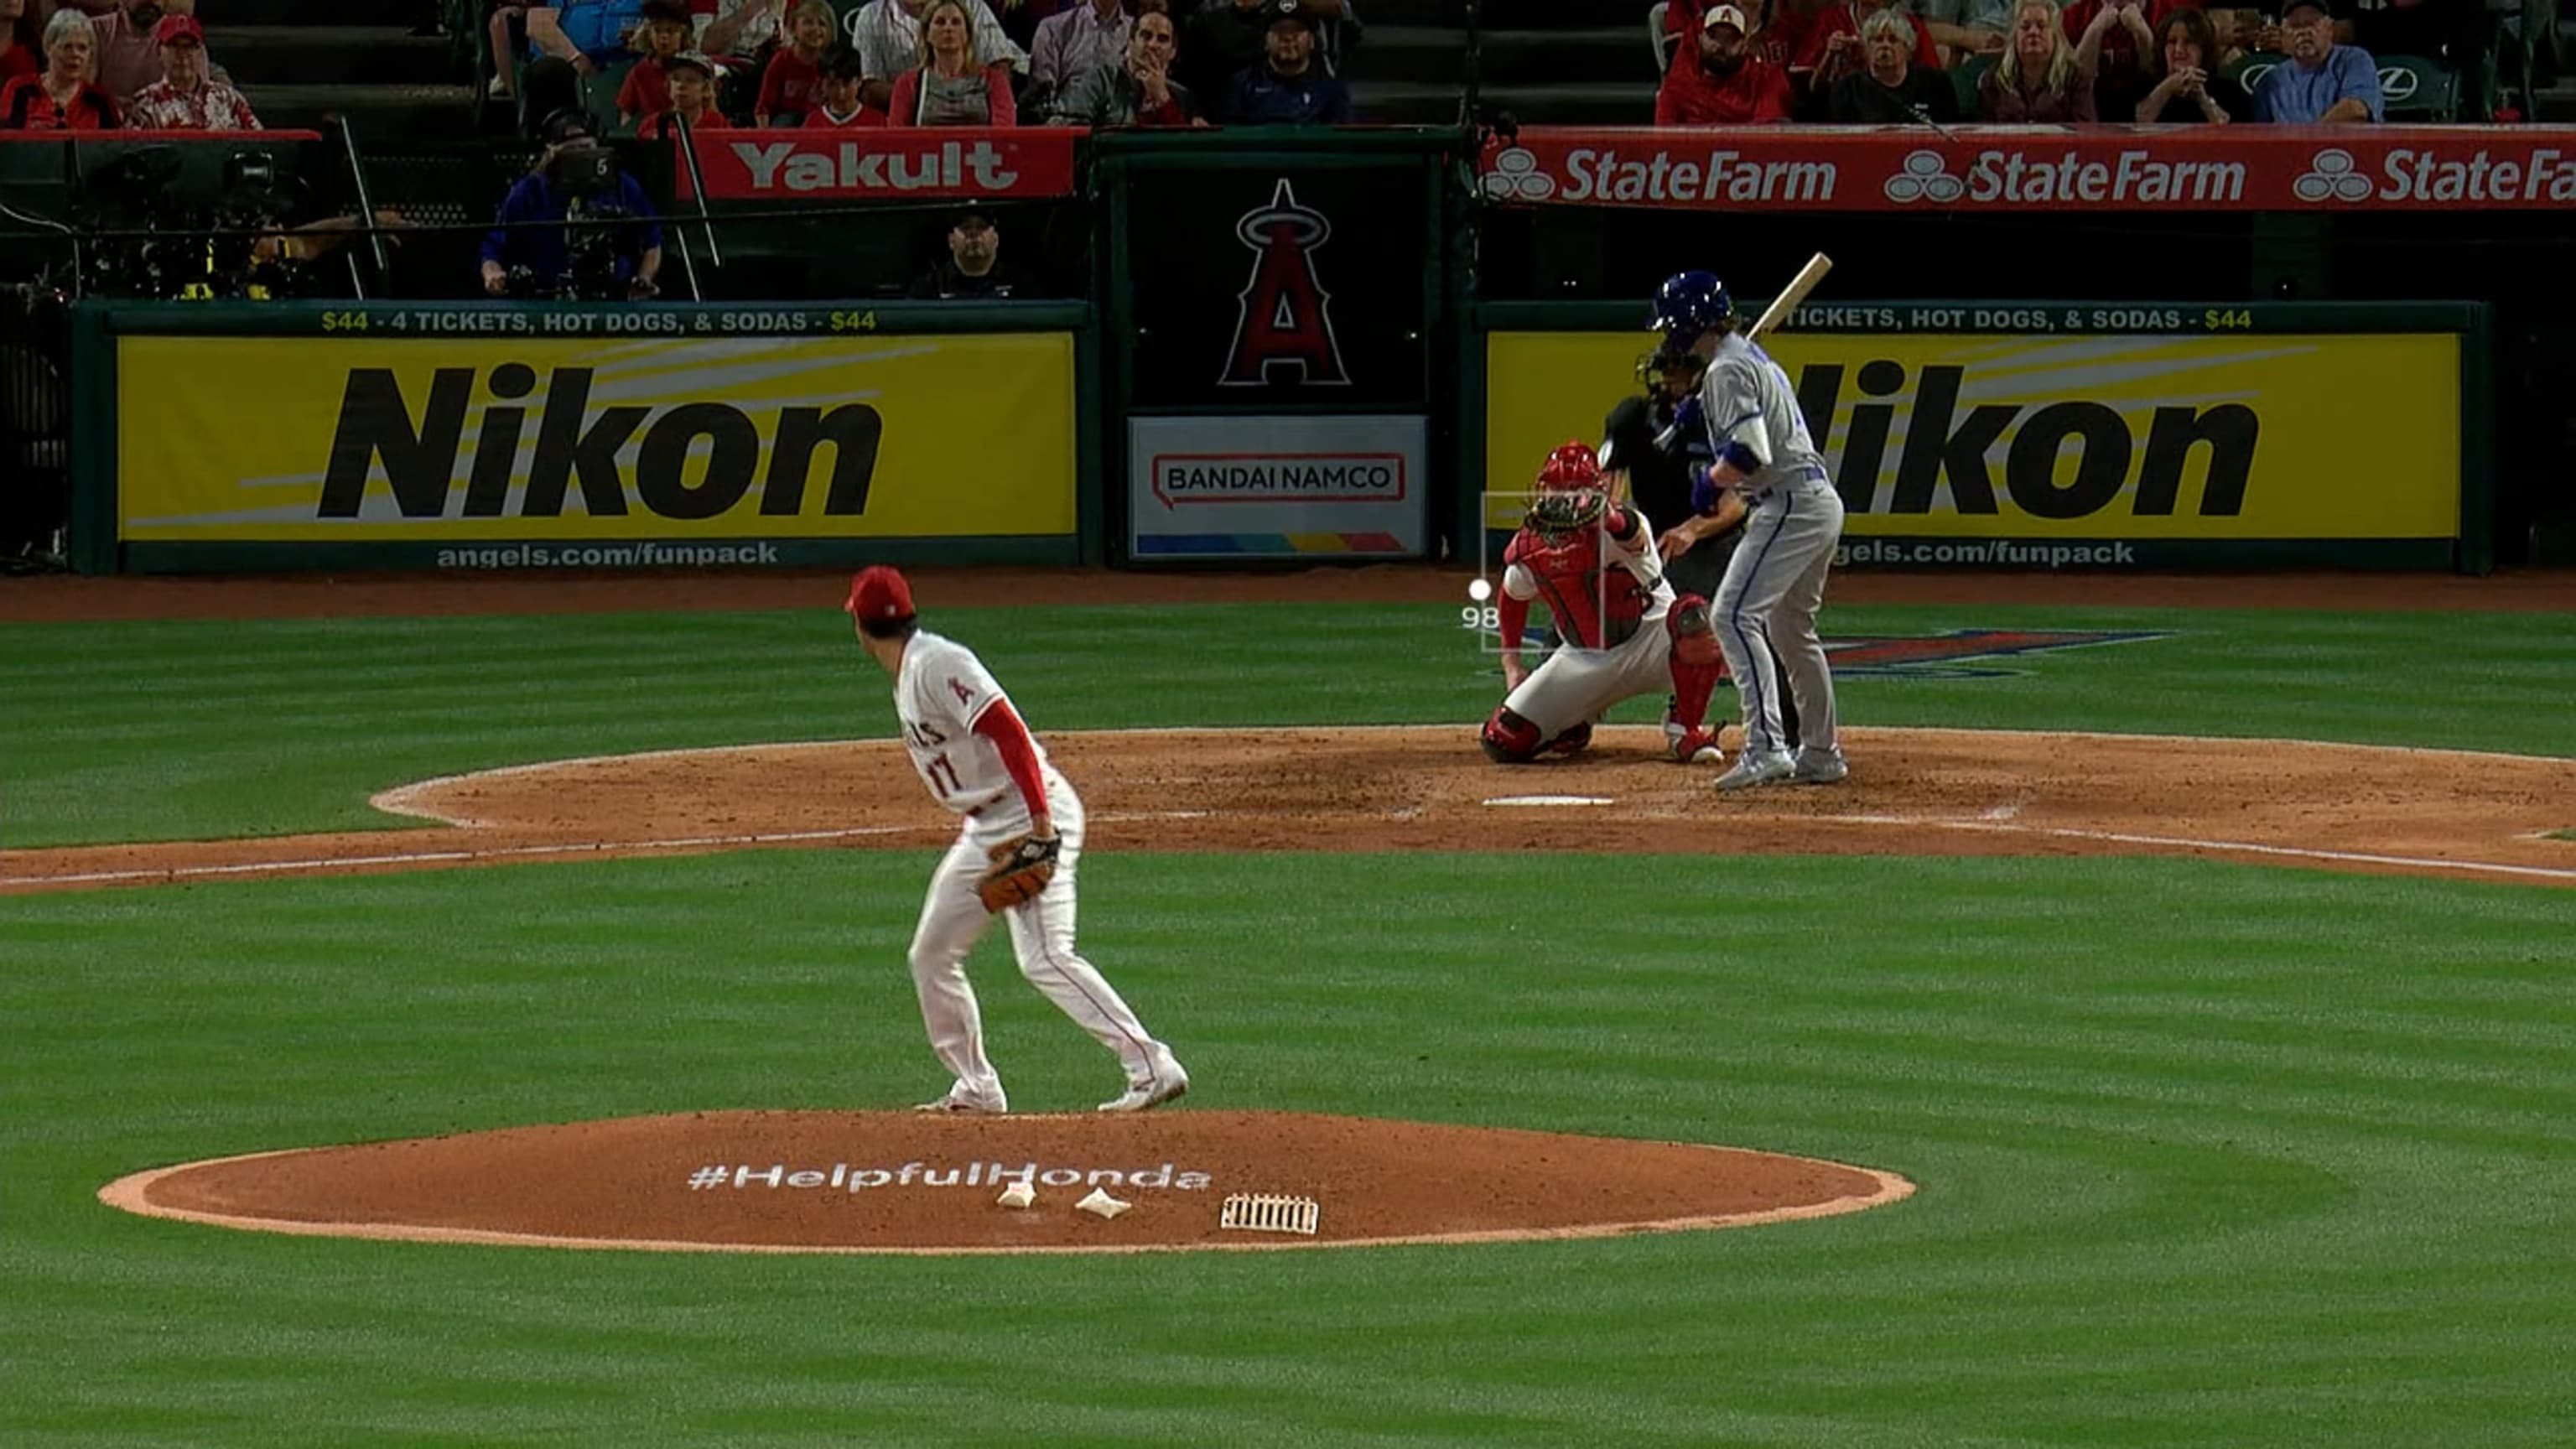 MLB/ Shohei Ohtani strikes out 11, Angels beat Royals 2-0